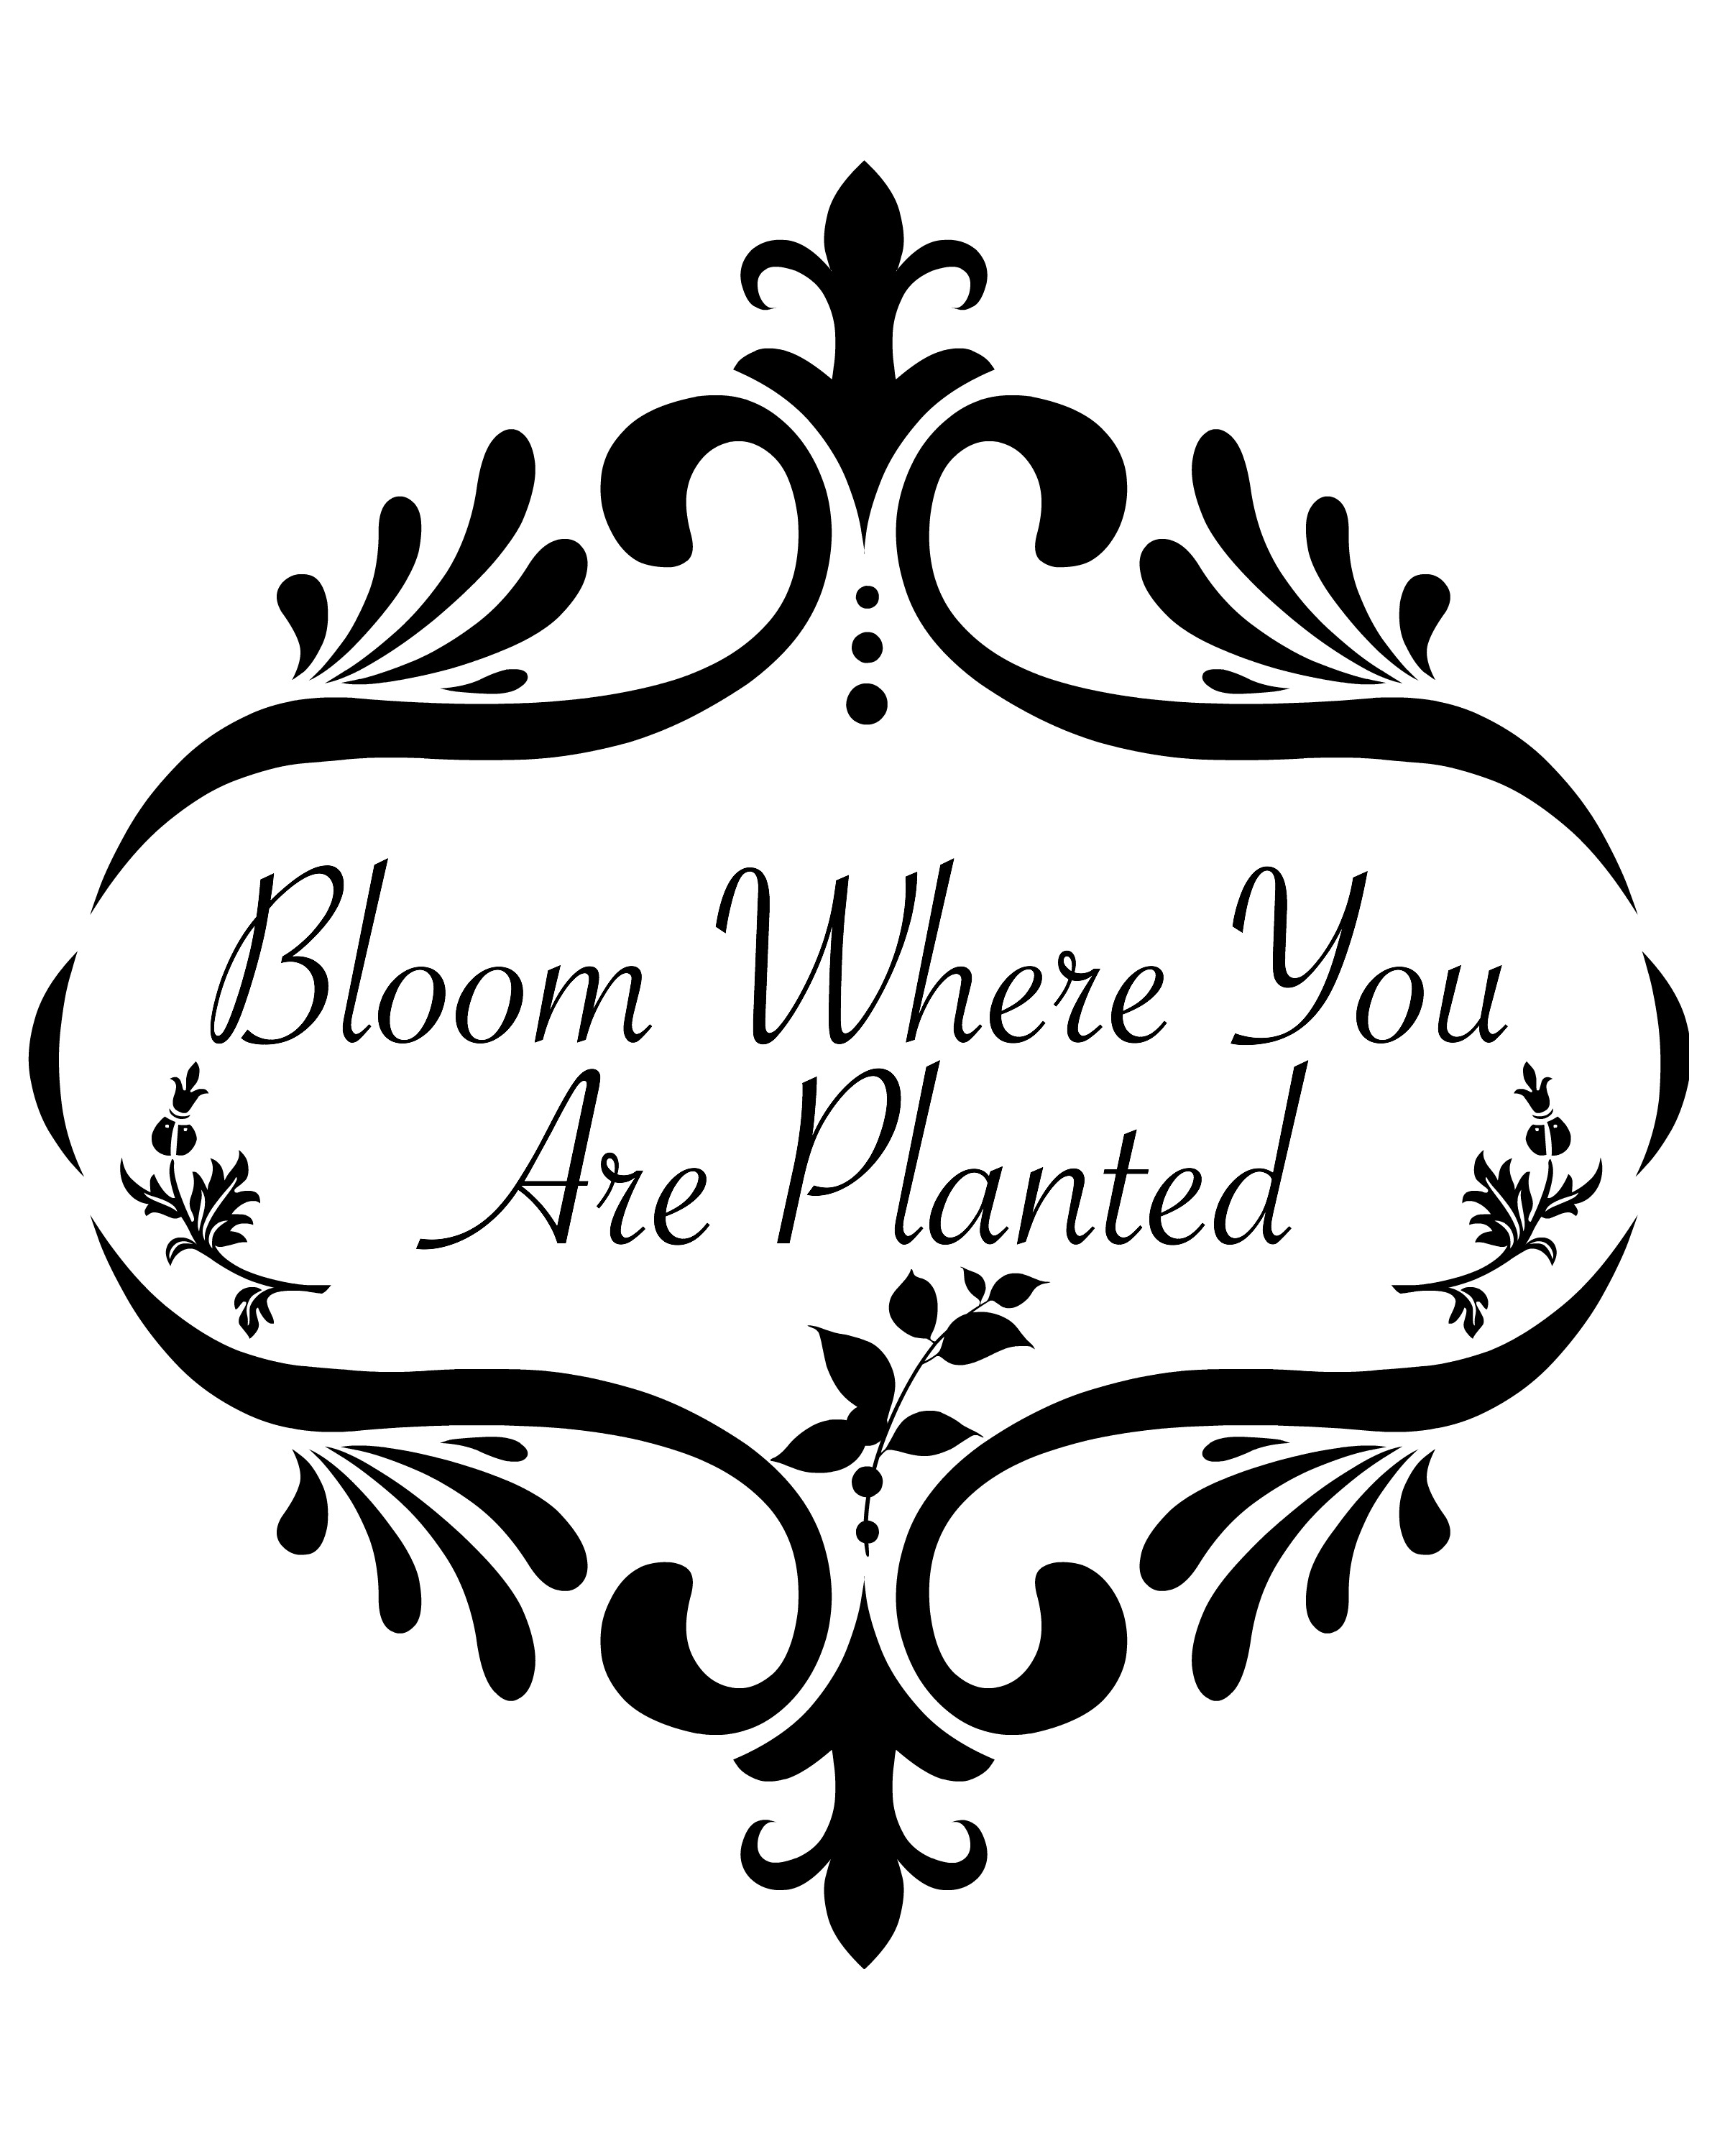 Bloom Where You Are Planted – Free Printable